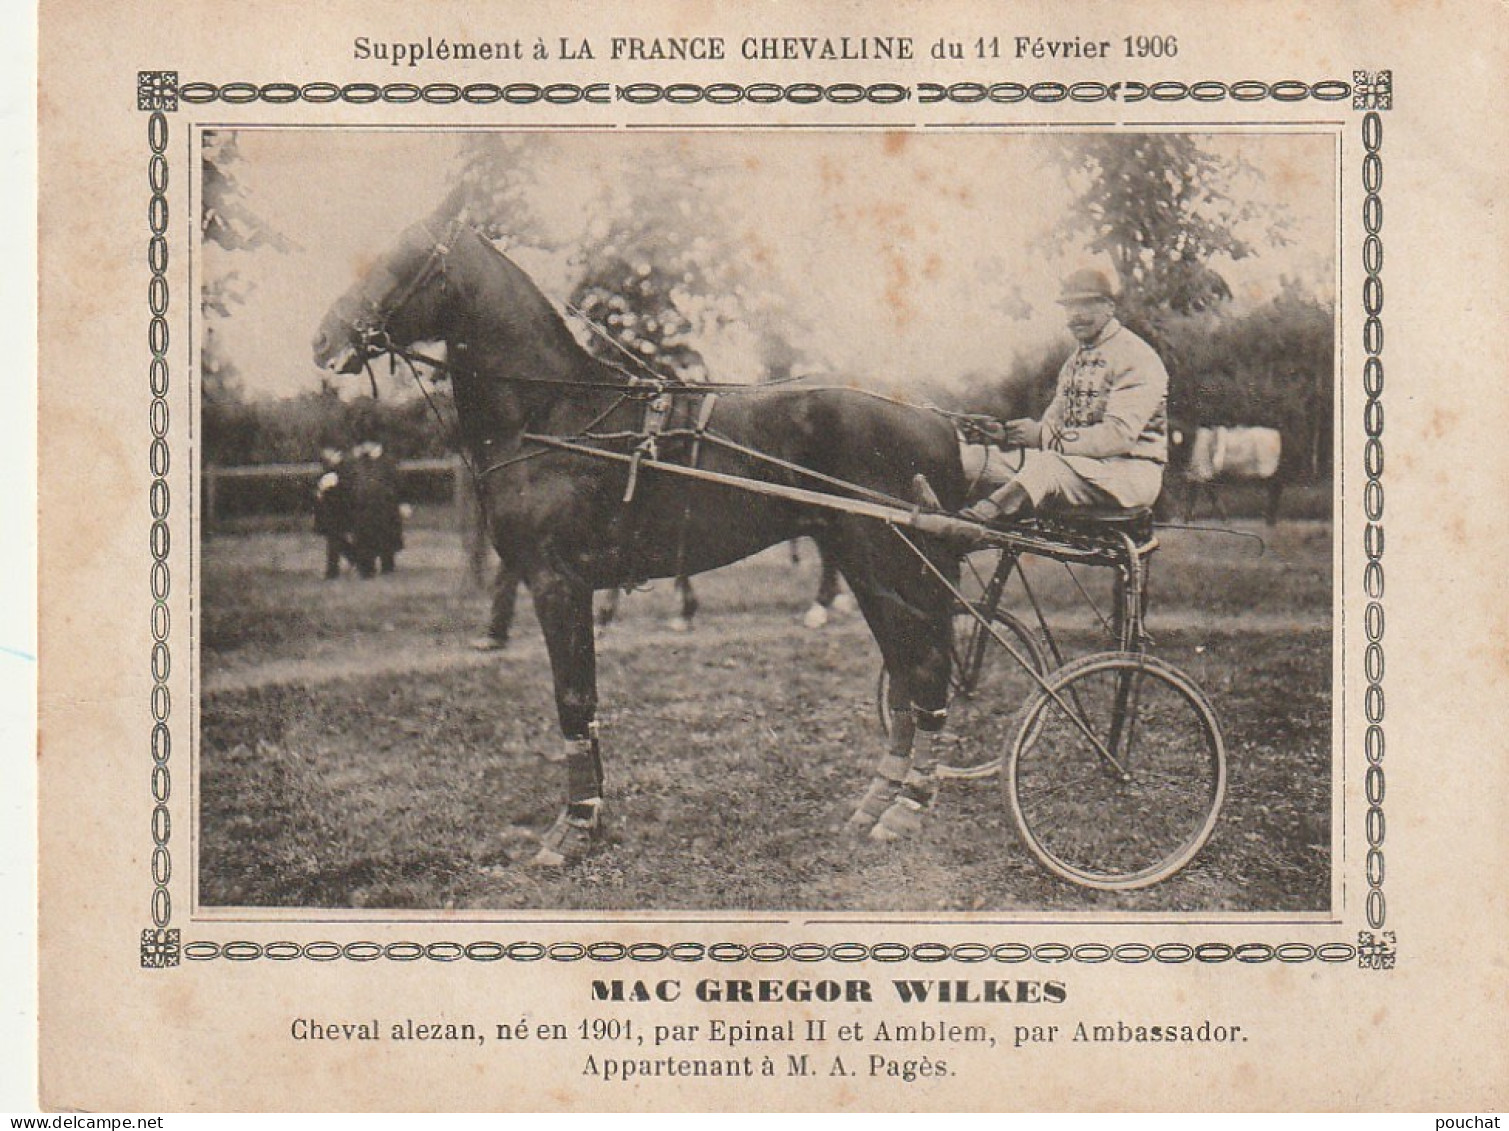 AA+ - " MAC GREGOR WILKES " - CHEVAL ALEZAN APPARTENANT A M. A. PAGES - SUPPL. " FRANCE CHEVALINE " , FEV. 1906 - SULKY - Horse Show